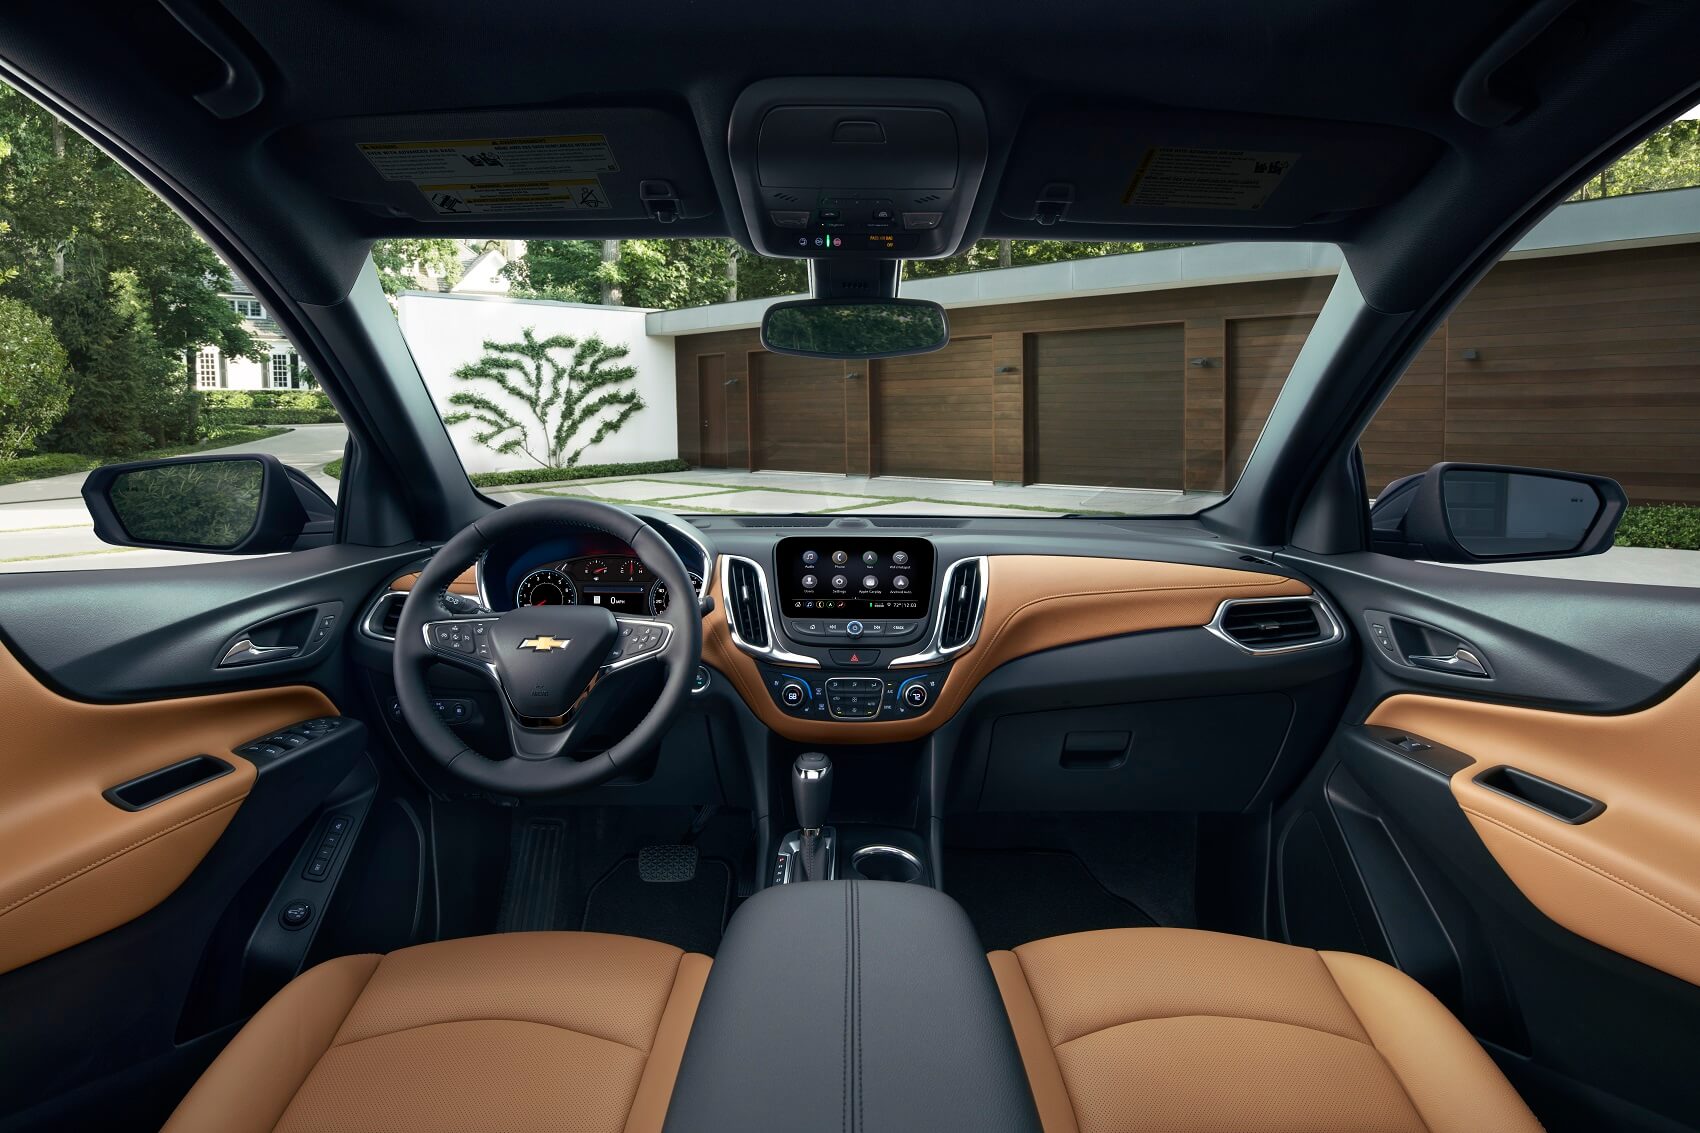 Inside the Chevy Equinox